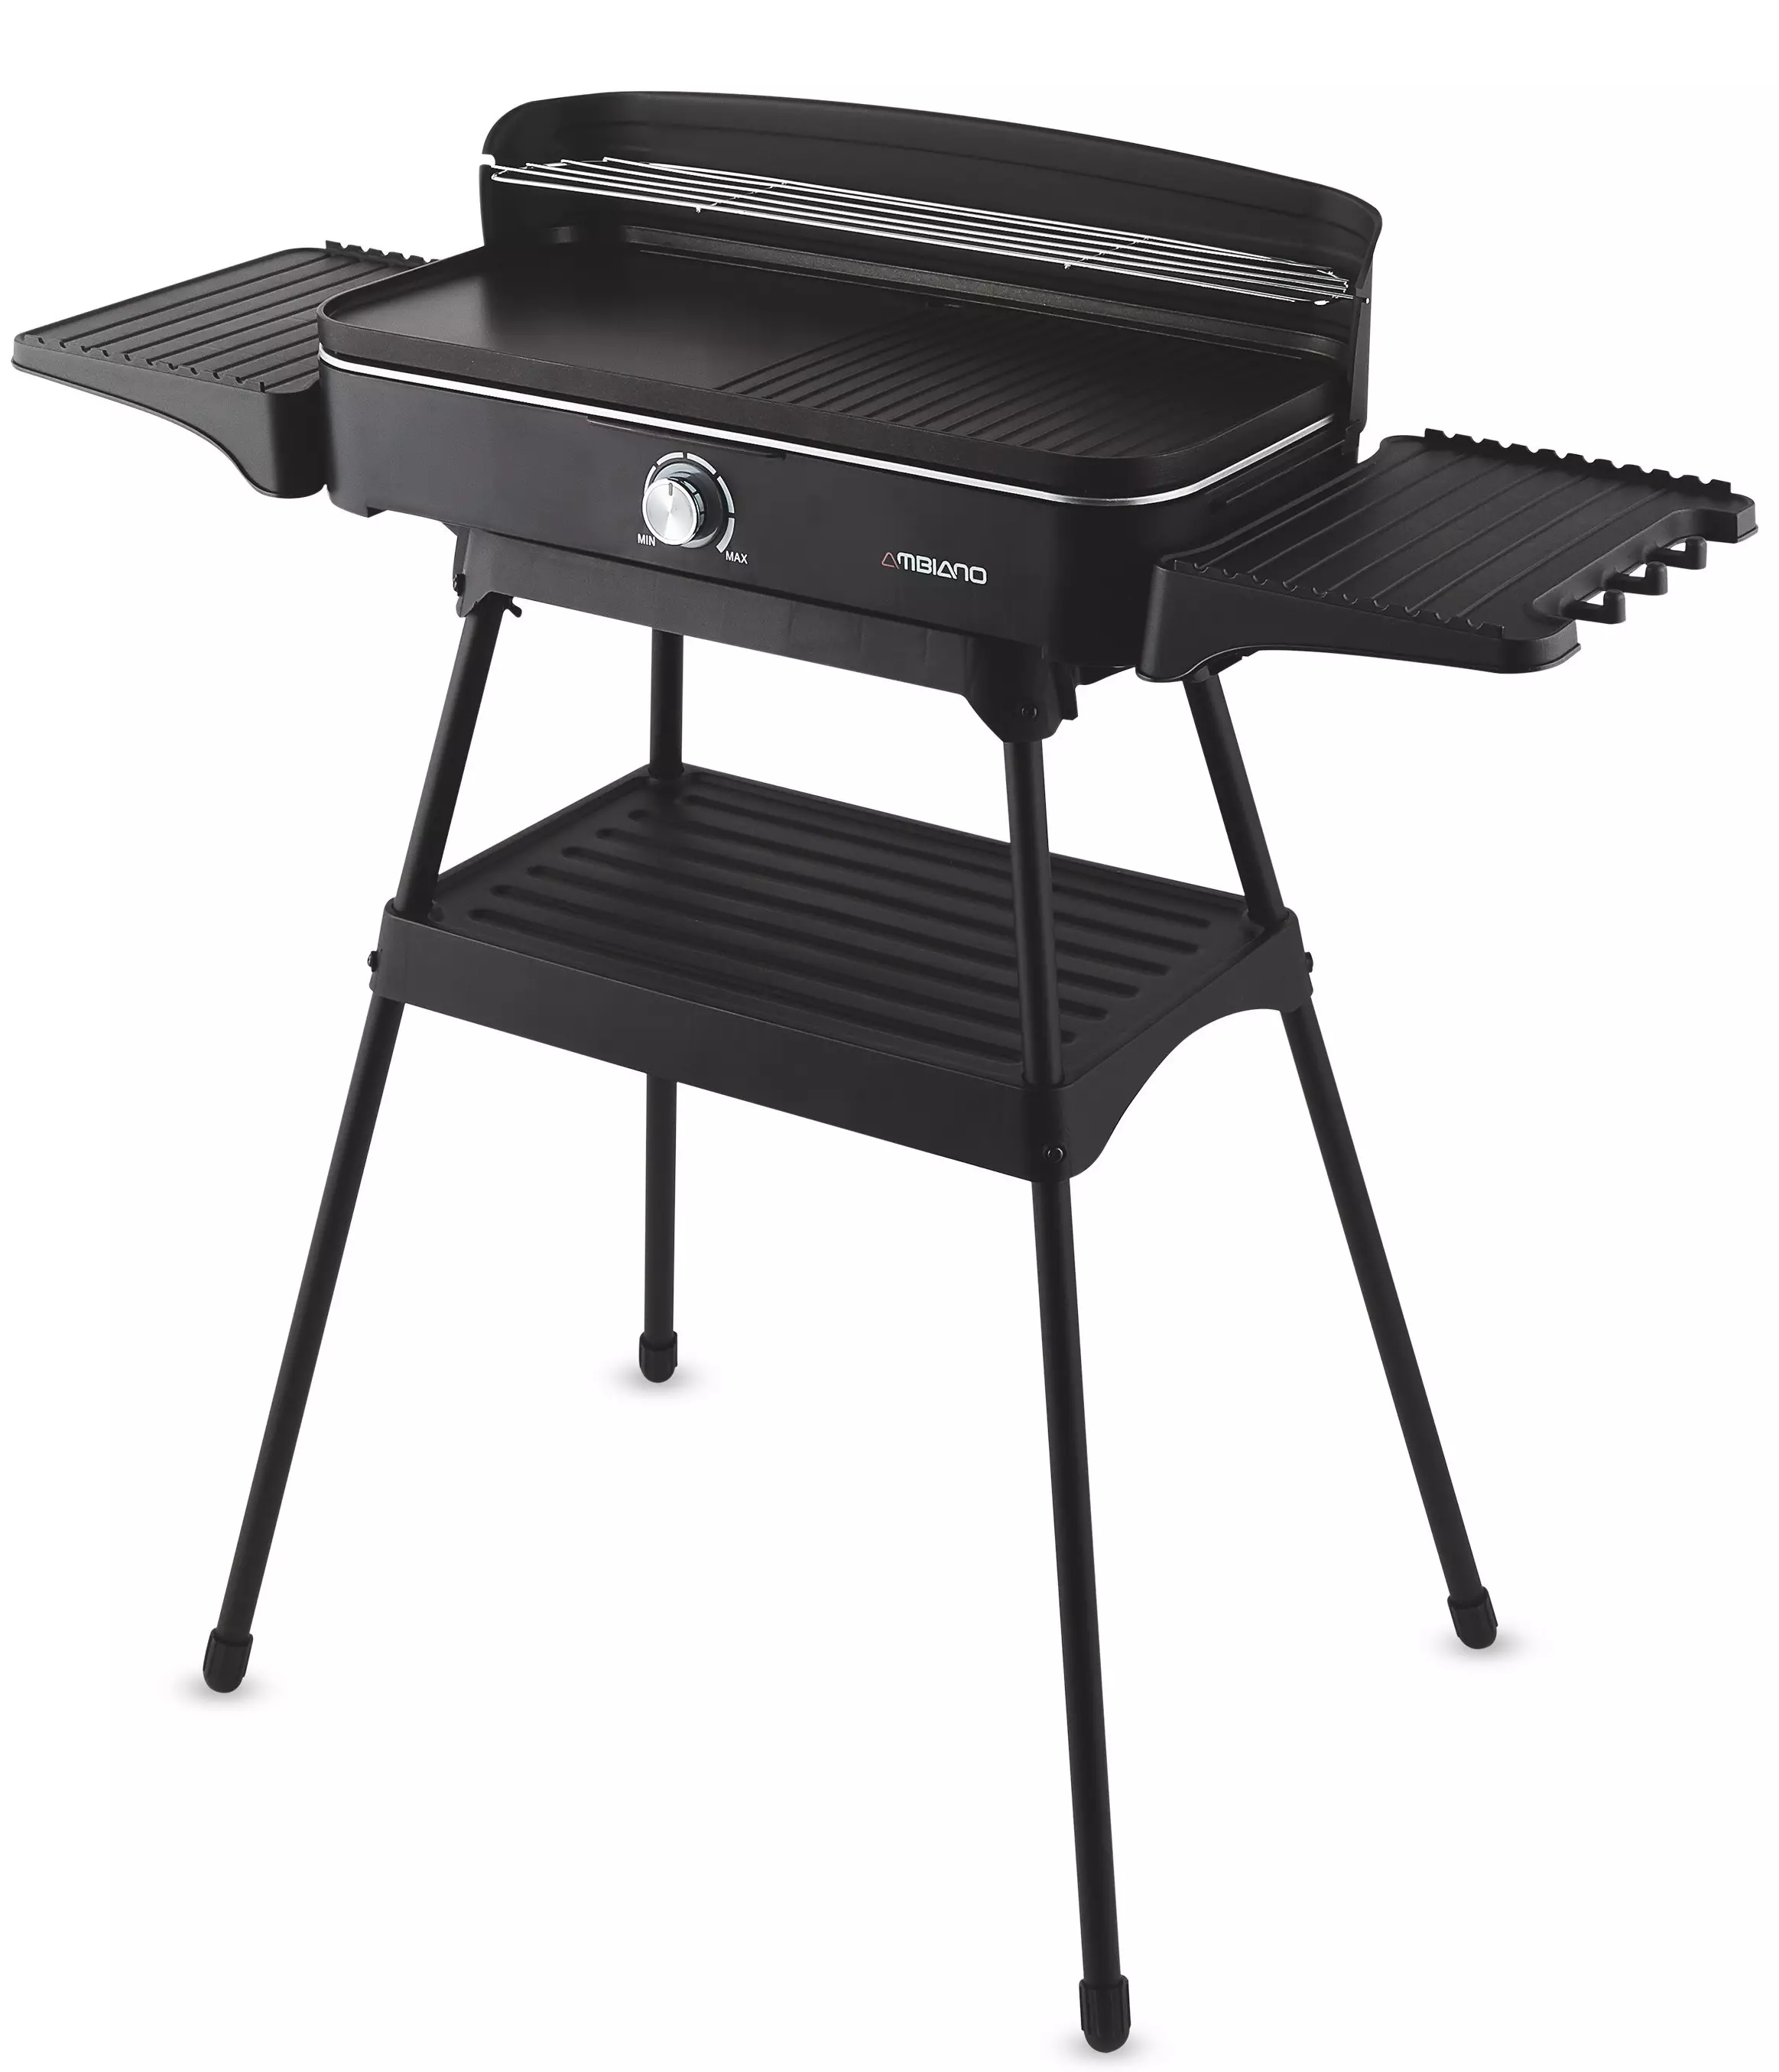 The Ambiano grill is just £34.99 (